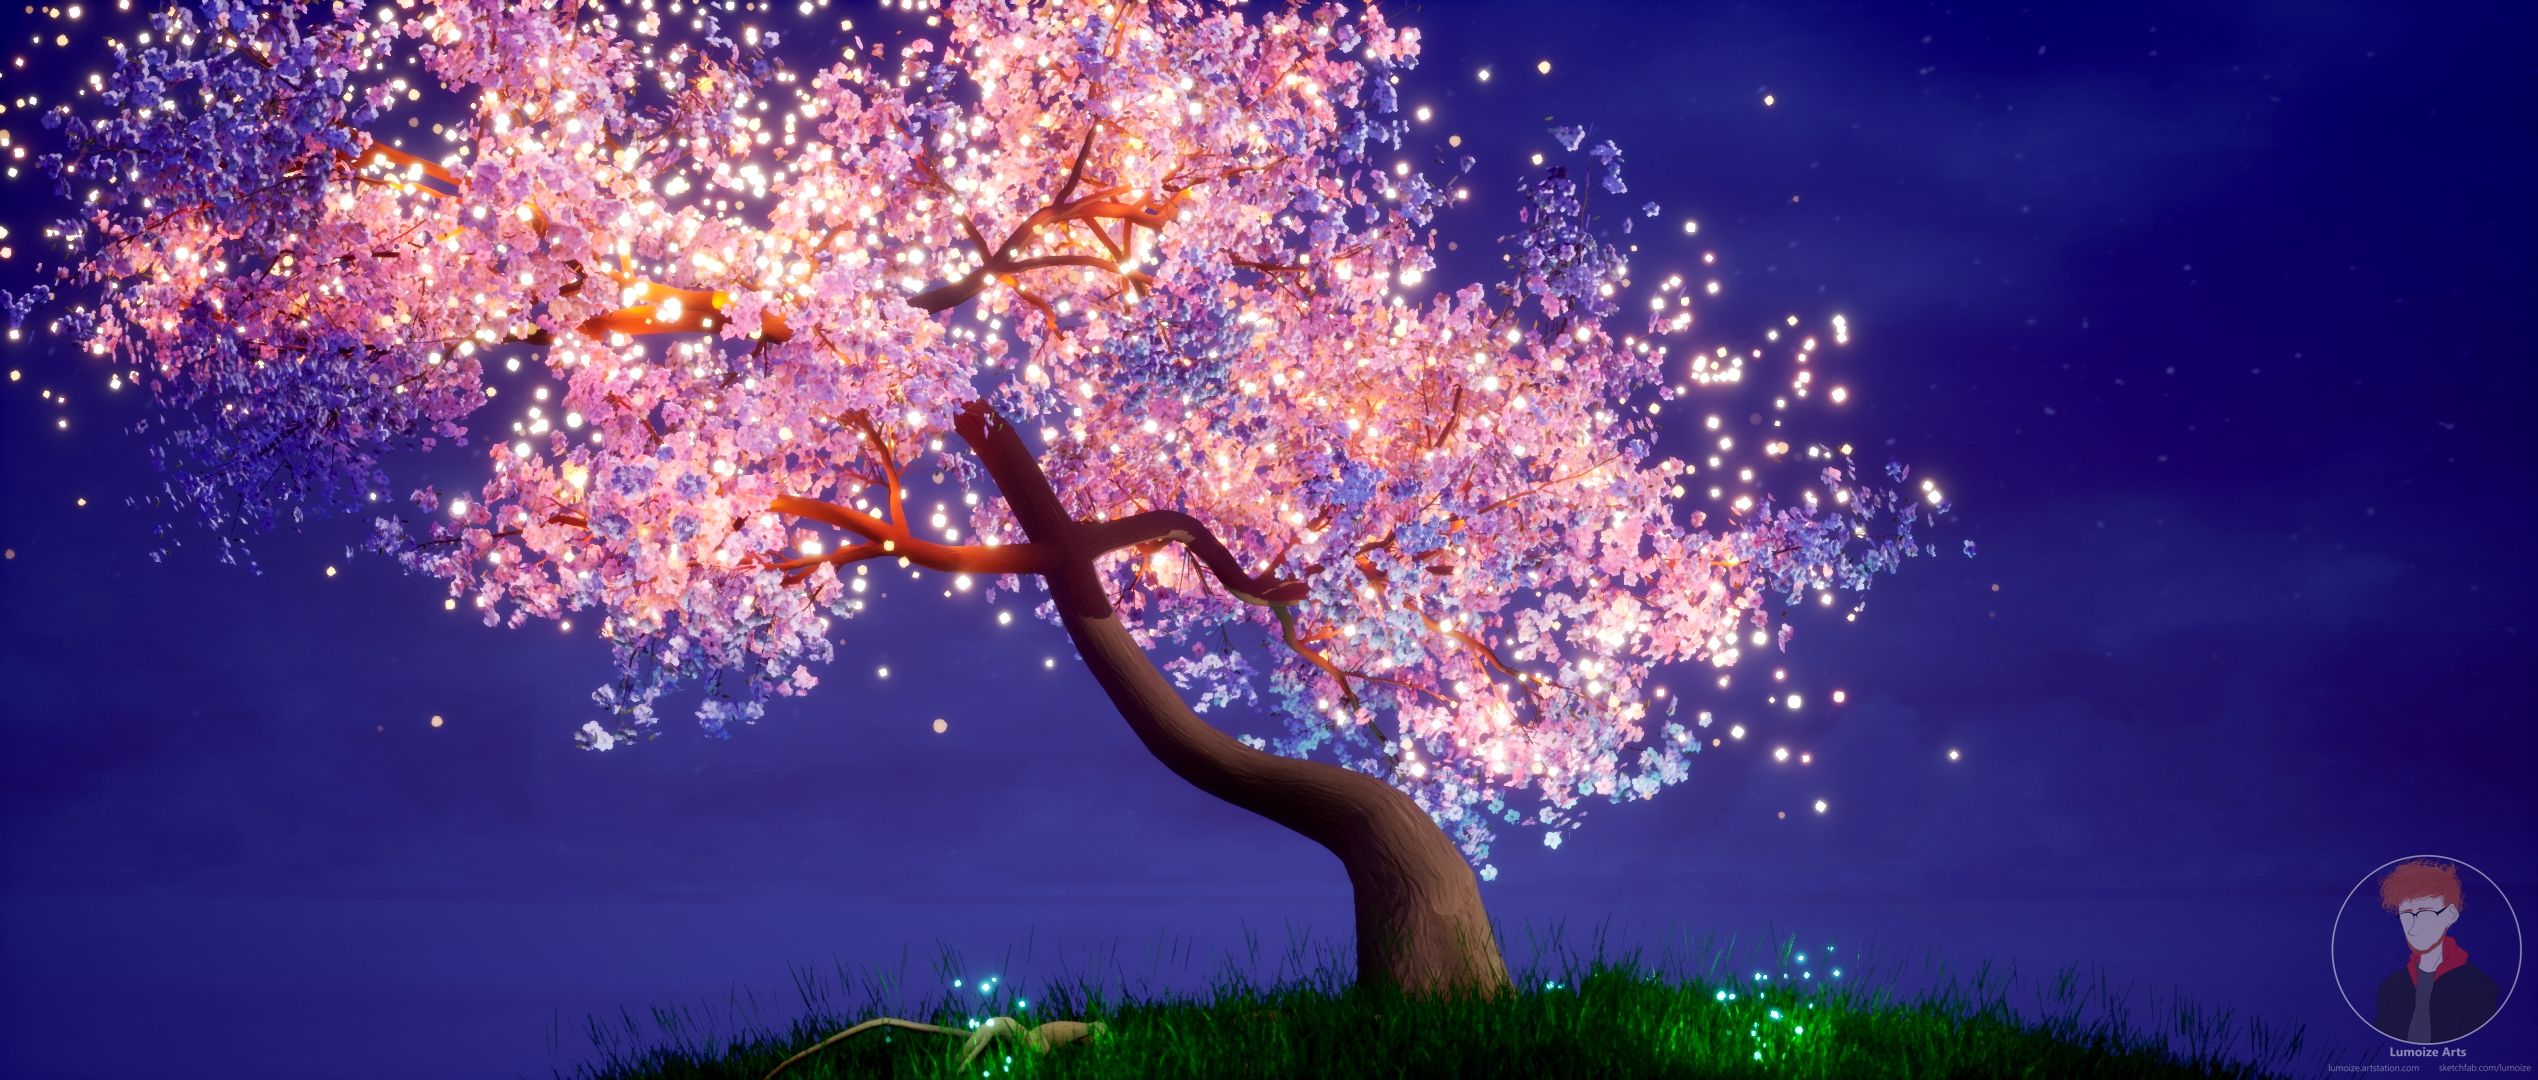 Cherry Blossom Trees Wallpapers - Wallpaper Cave